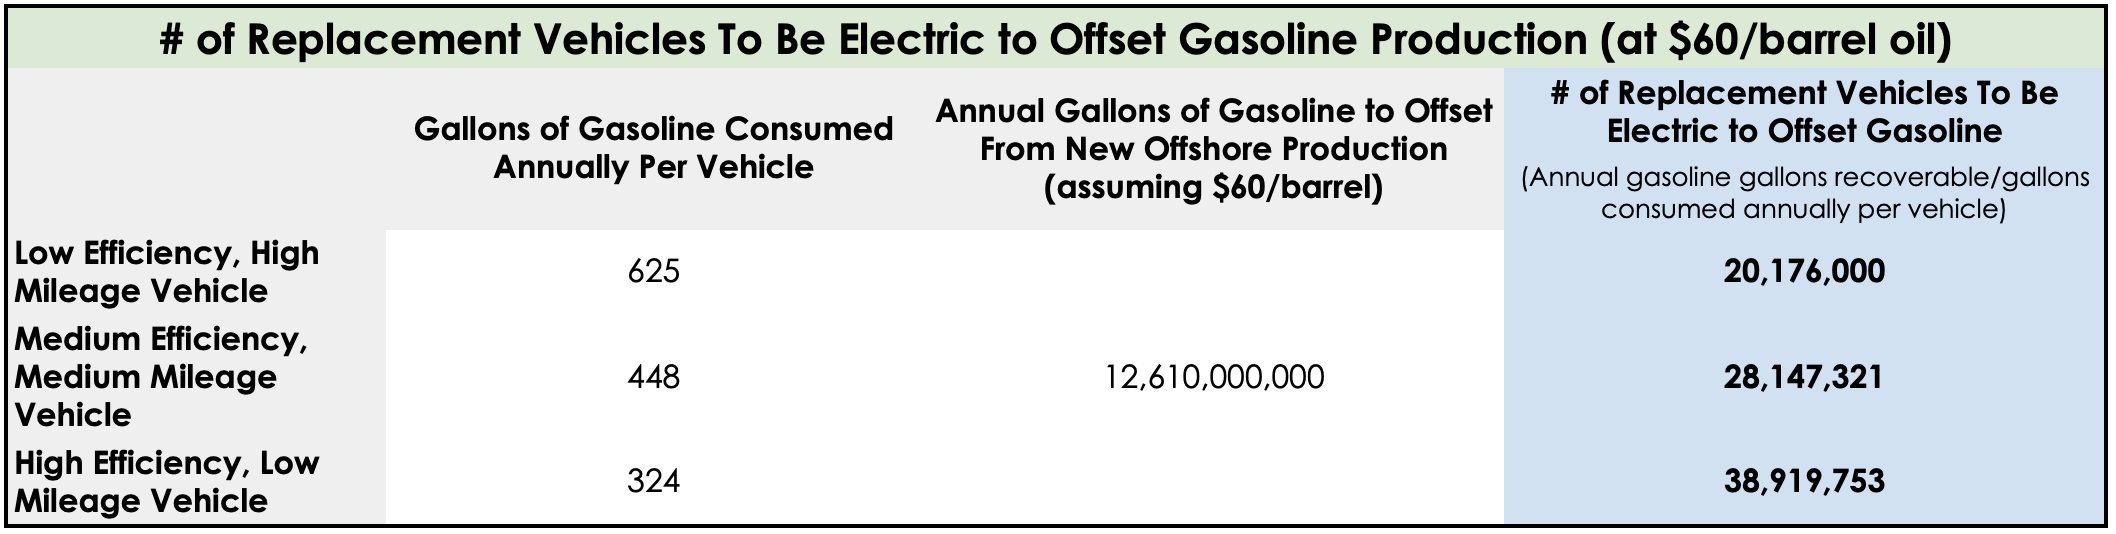 Table showing how many EVs it would take to reduce gasoline more than what could be produced from drilling in currently-protected offshore regions at $60 per barrel.